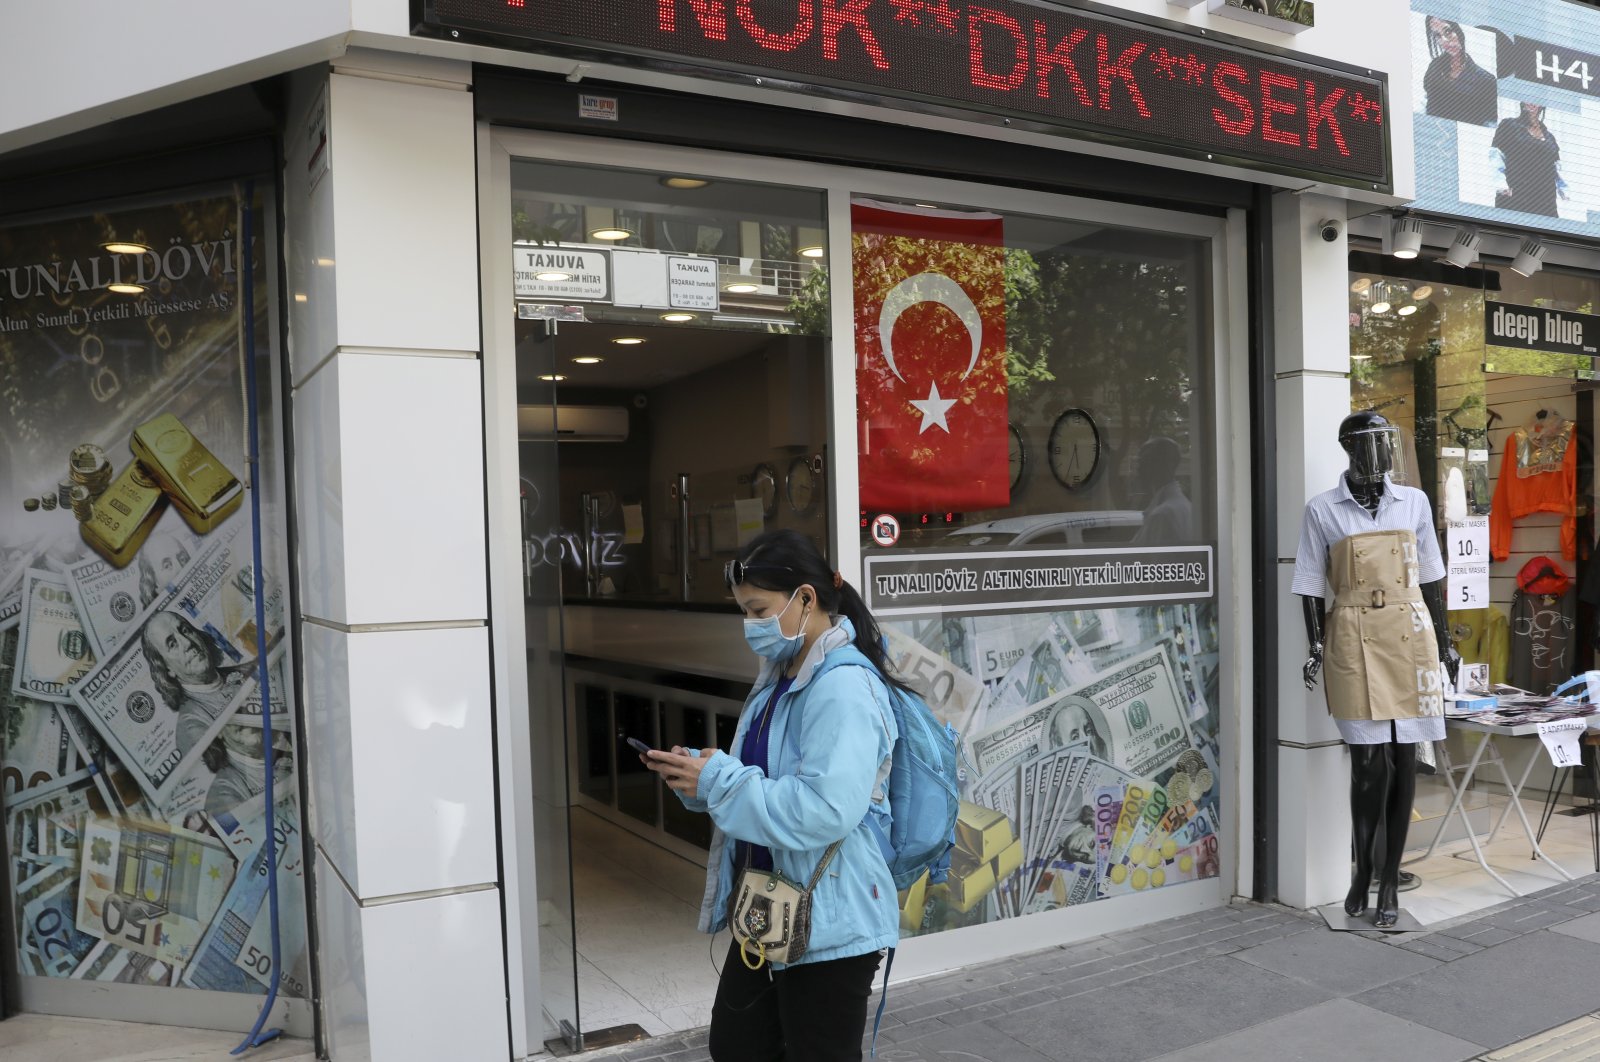 A foreigner wearing a face mask for protection against the coronavirus leaves a currency exchange office in Ankara, Turkey, Friday, May 8, 2020. (AP Photo)